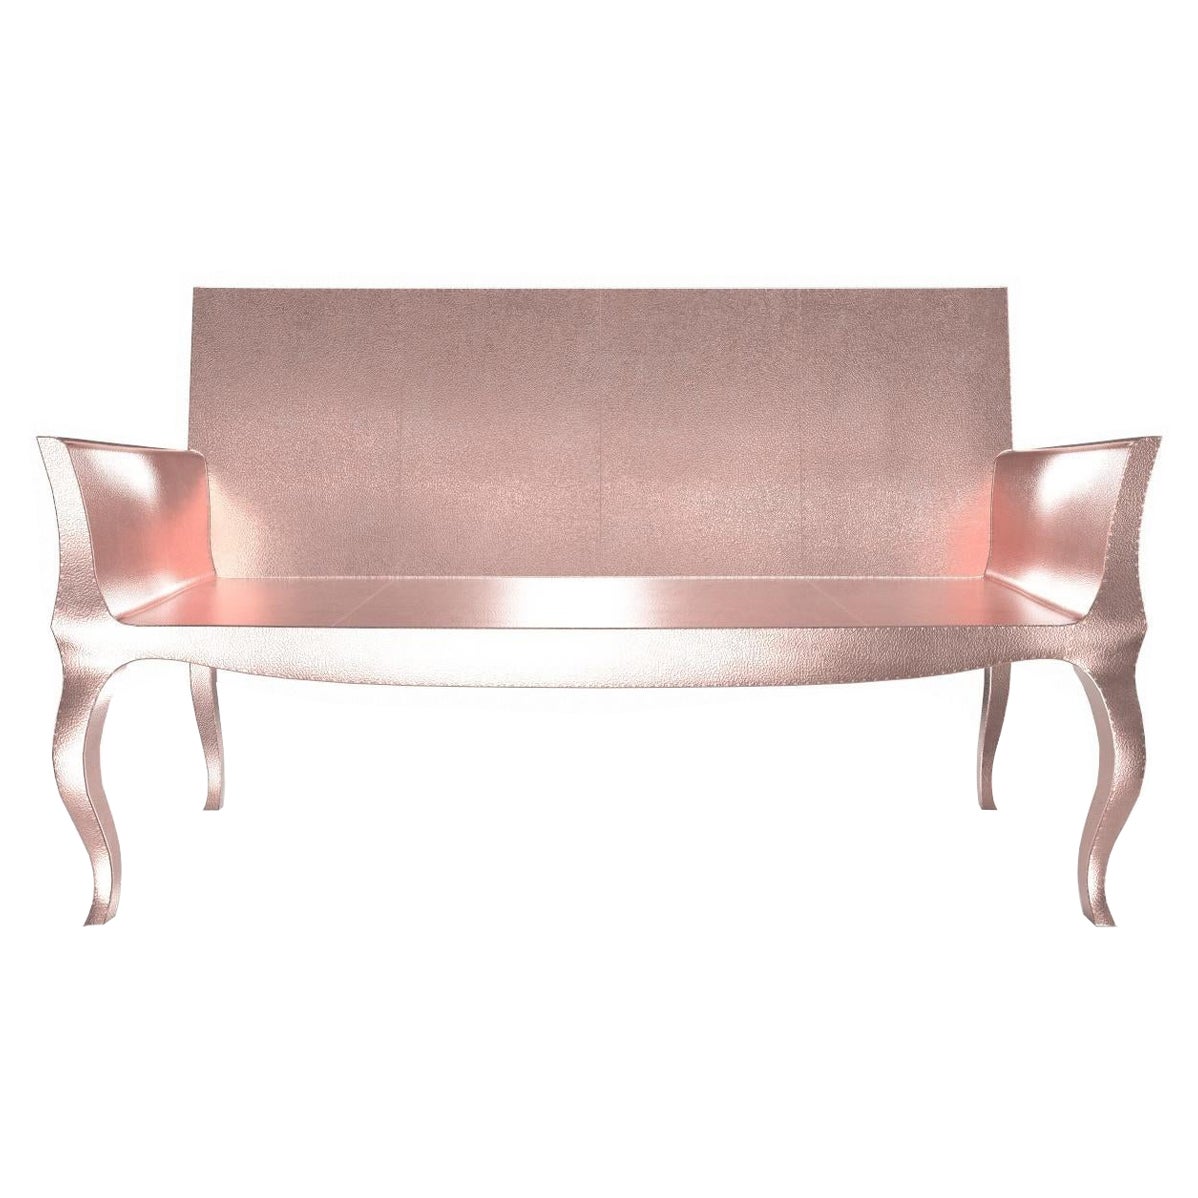 Louise Settee Art Deco Chaise Longues in Fine Hammered Copper by Paul Mathieu For Sale